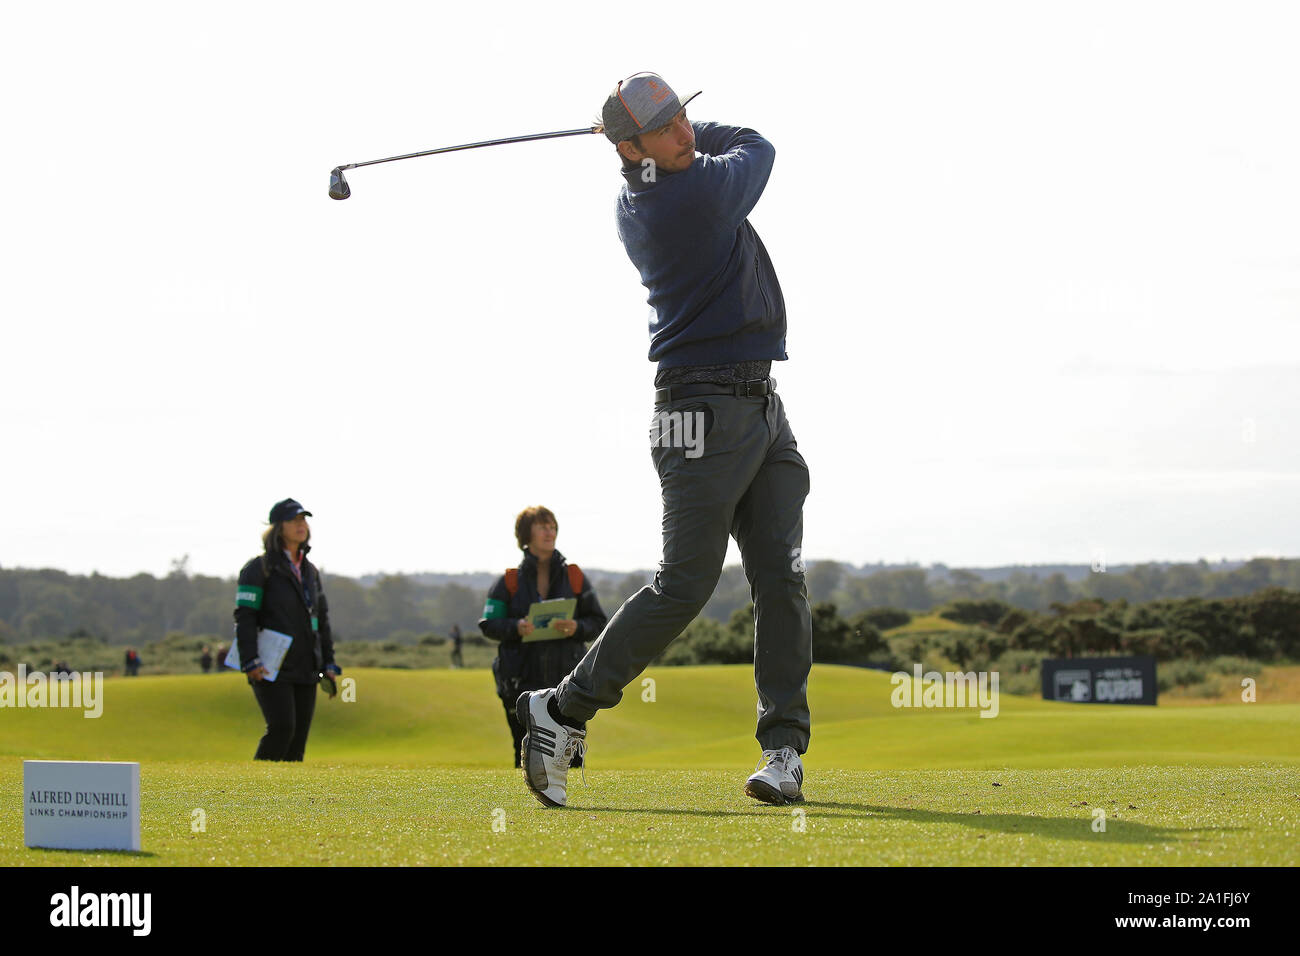 ST ANDREWS, SCOTLAND. 26 SEPTEMBER 2019: Retired ski racer Felix Neureuther of Germany during round one of the Alfred Dunhill Links Championship, European Tour Golf Tournament at St Andrews, Scotland Stock Photo